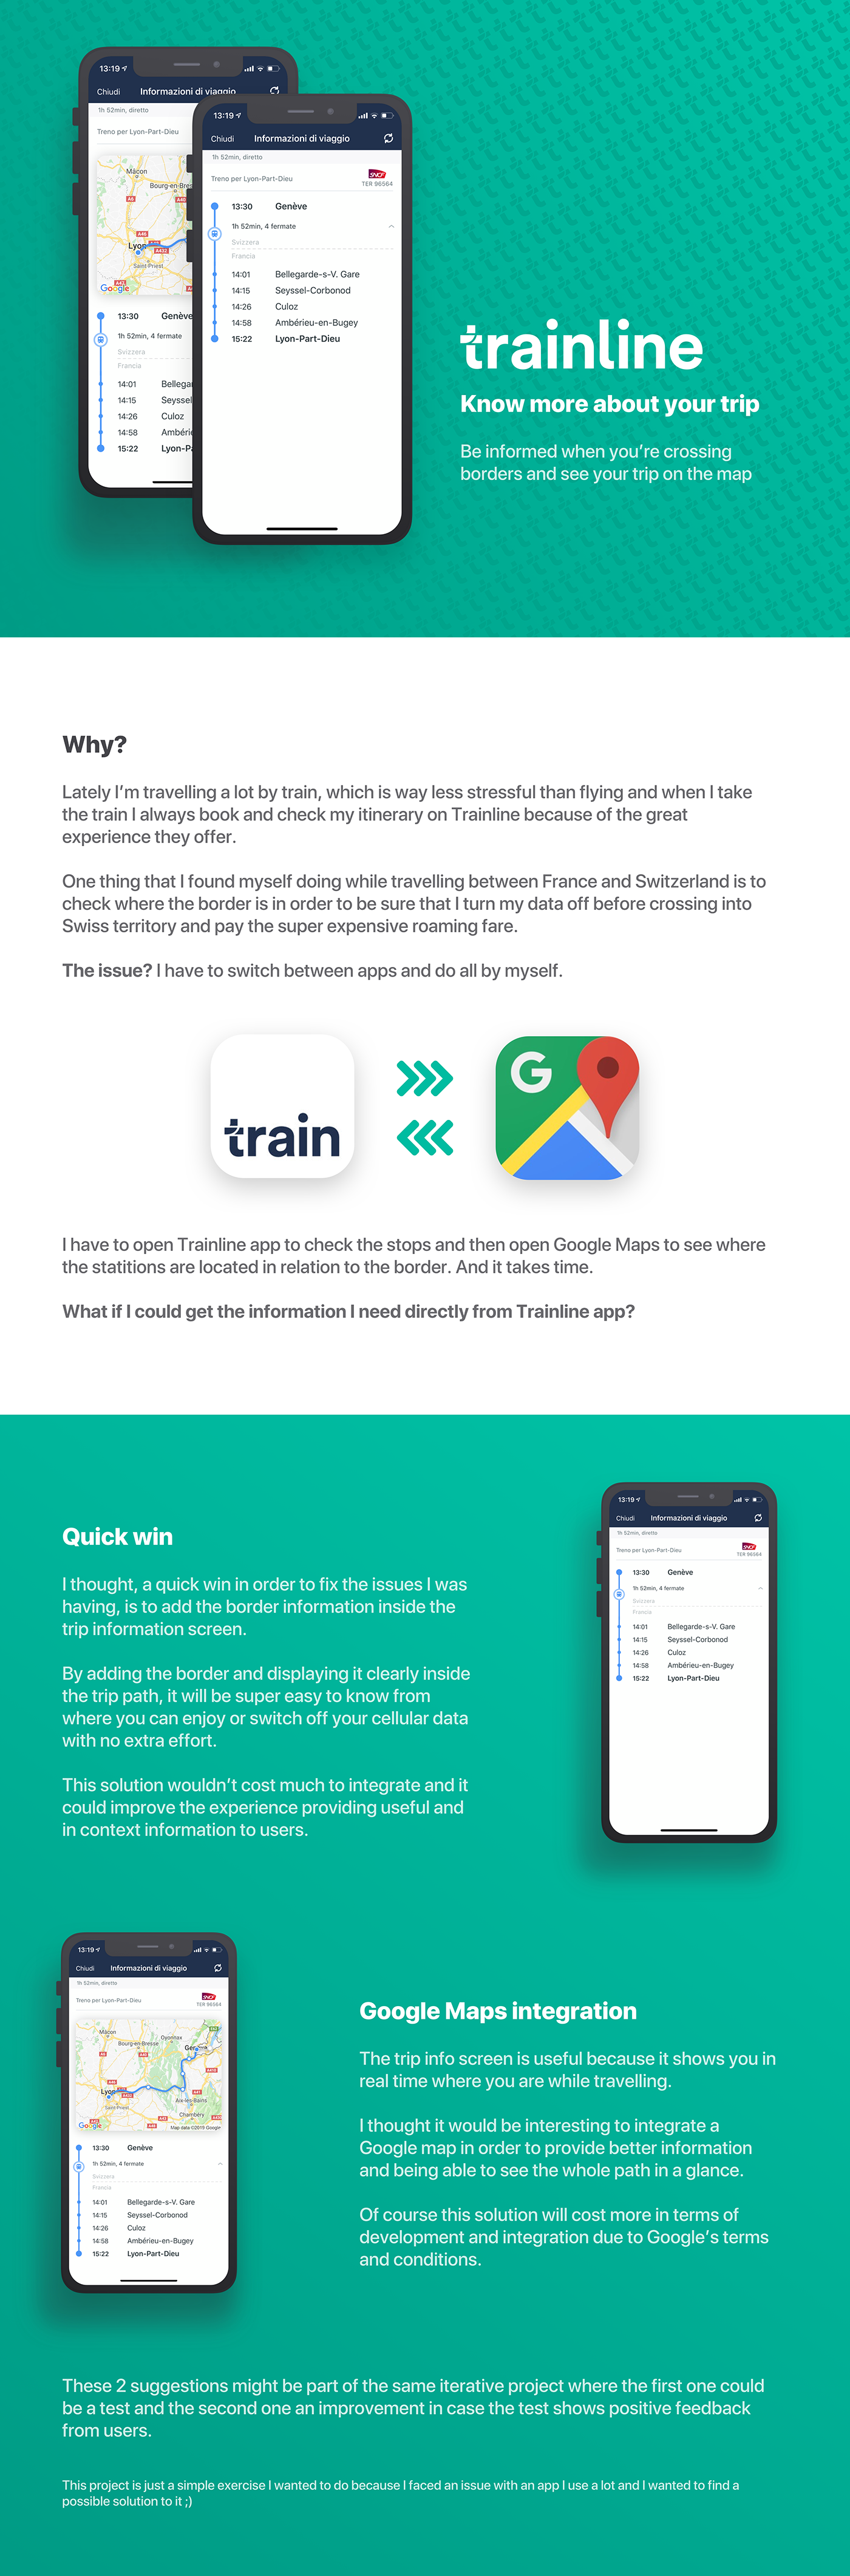 trainline Travel trip information real time train path mvp sncf borders user experience